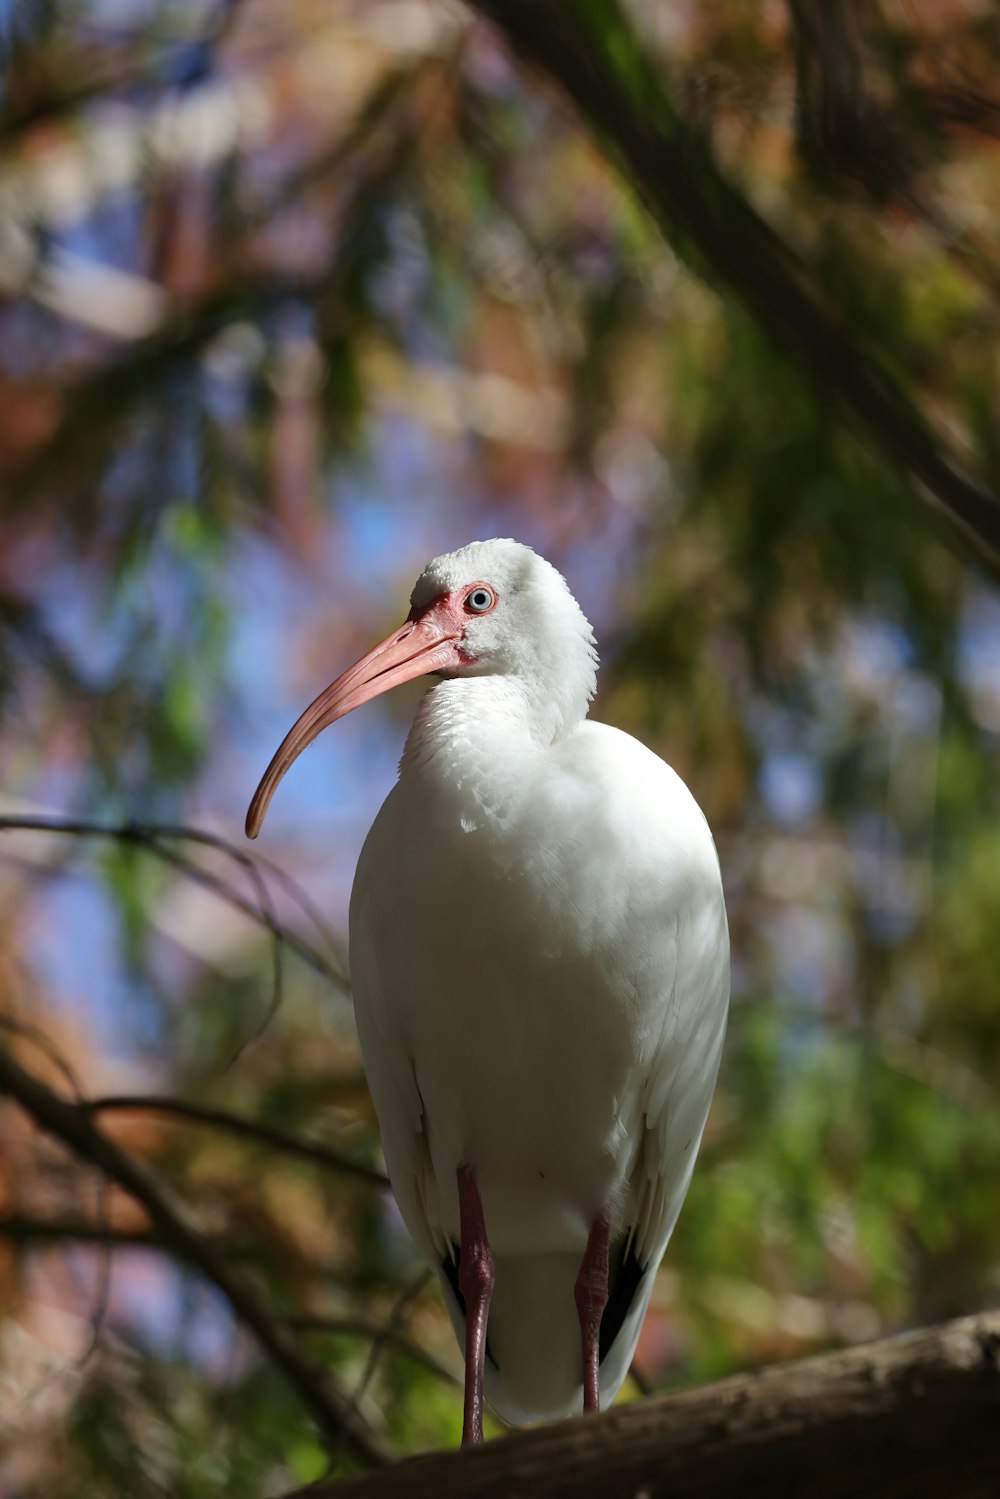 a white bird with a long beak sitting on a tree branch